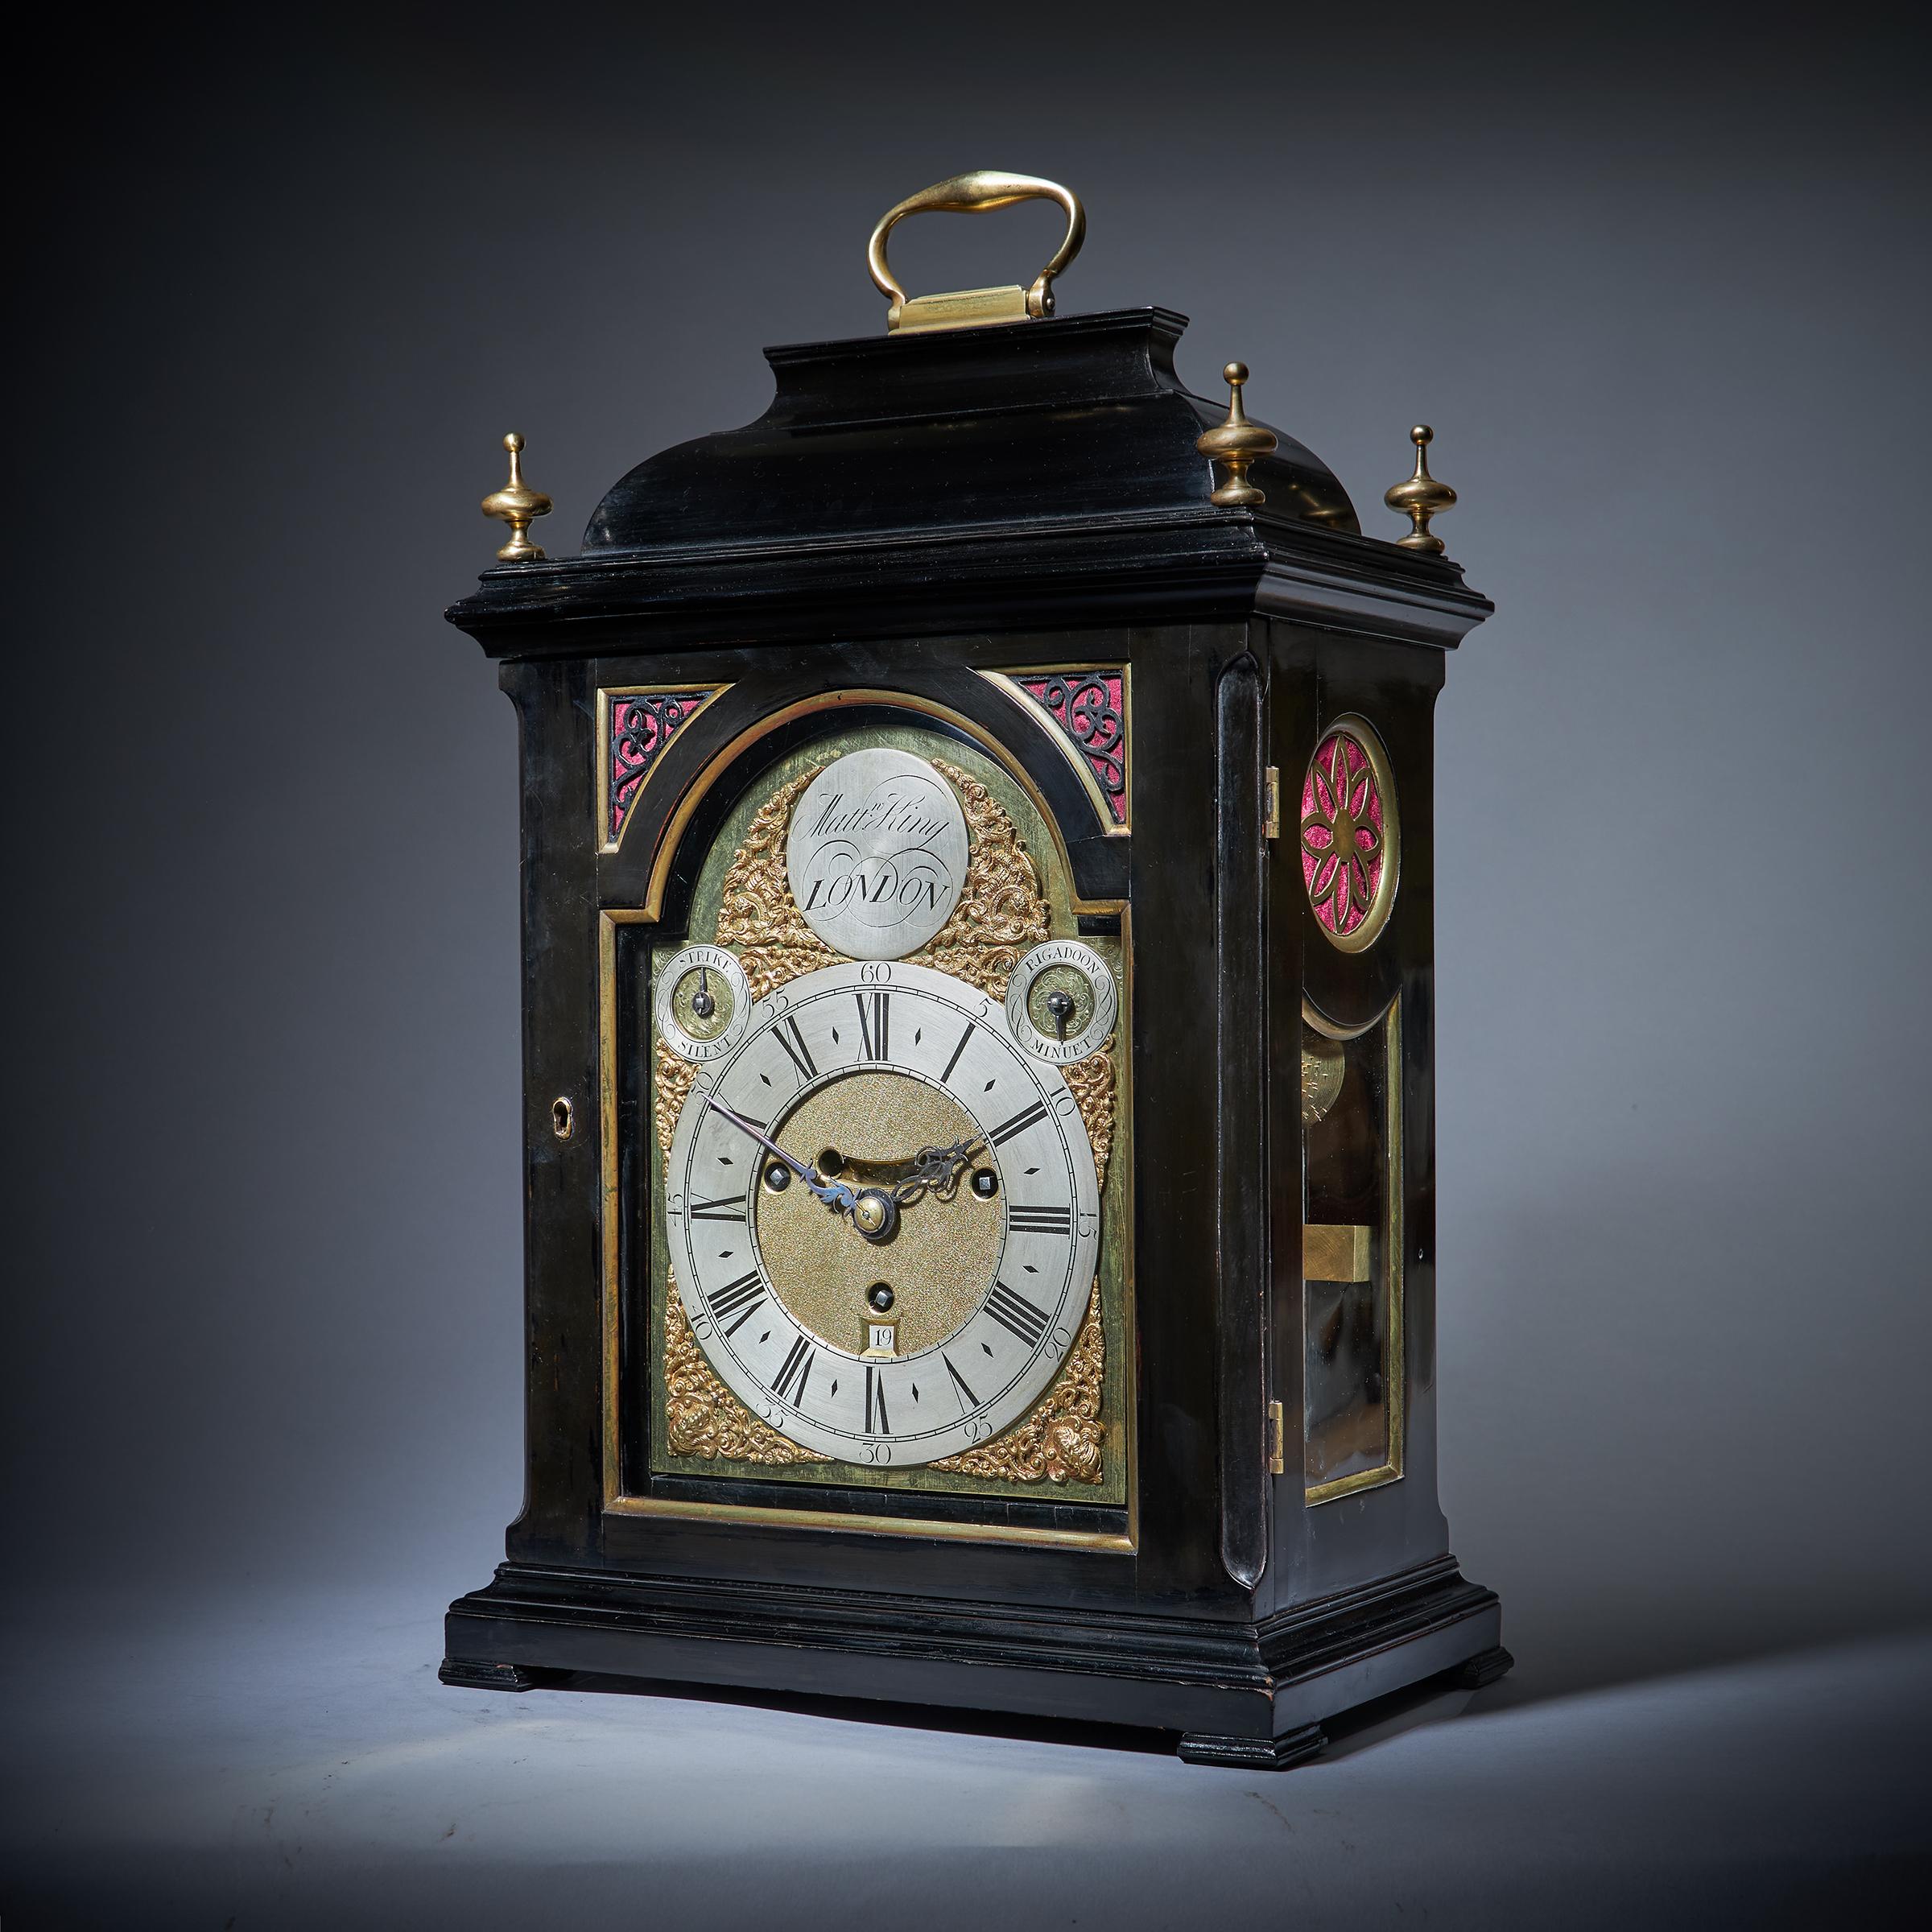 A Rare 18th Century George II Musical Table Clock by Matthew King, c. 1735. 1